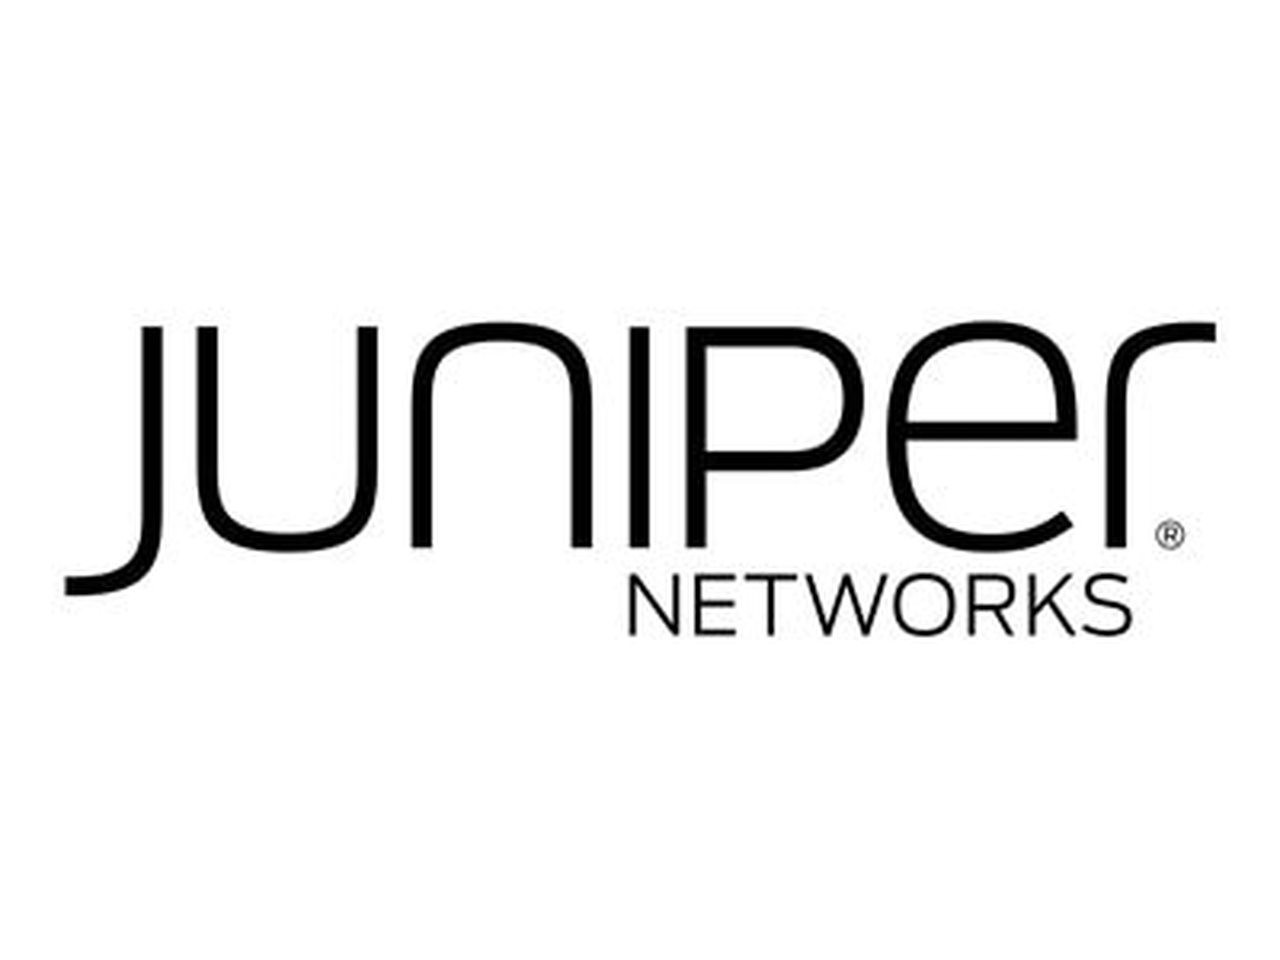 Juniper Sw, Ptx10K 100G Macsec License Sku, W/Out Customer Support, Must Purchase Cs Sku Separately, Perpetual